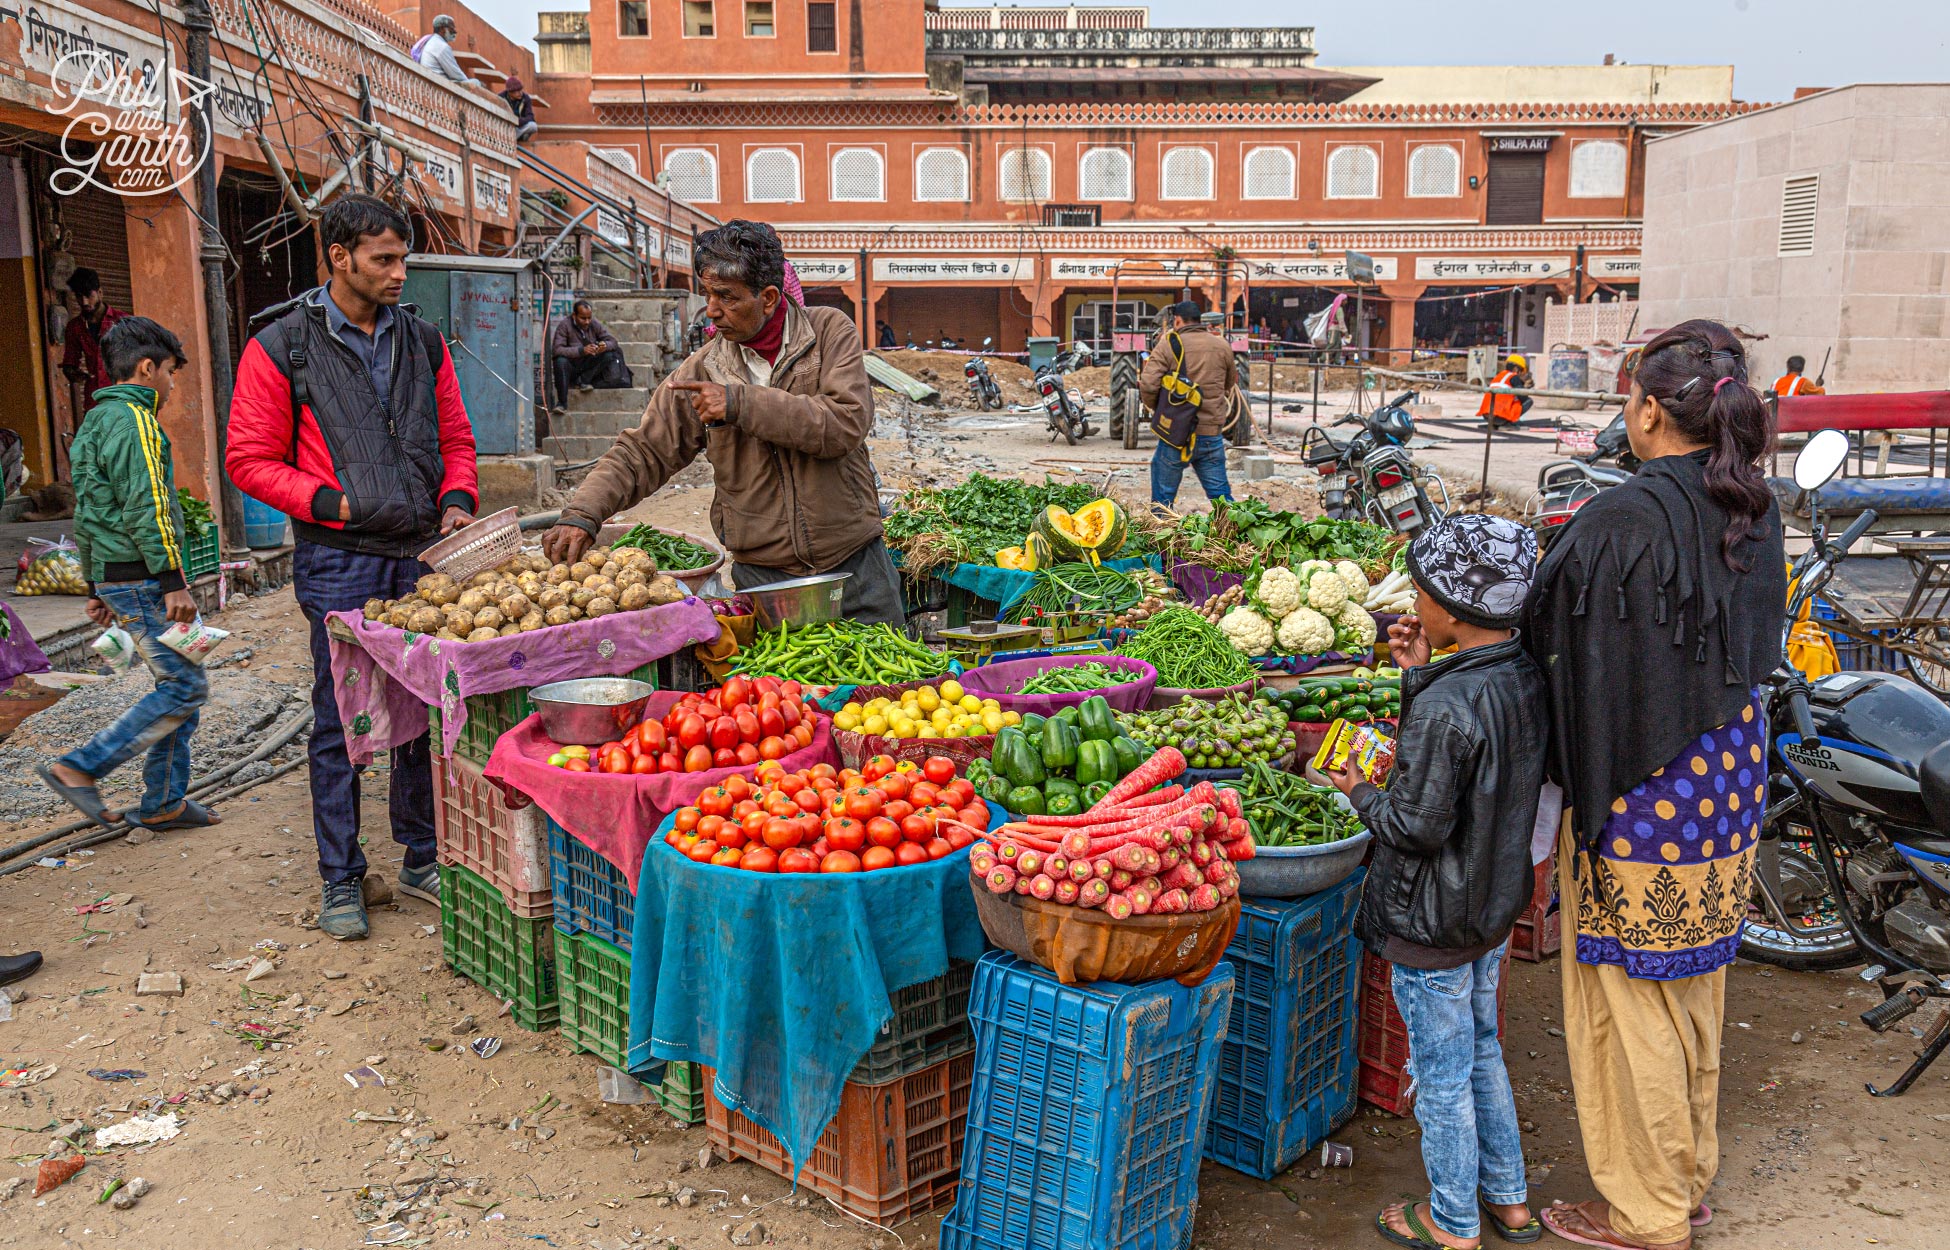 A fruit and veg stall on a street in Jaipur